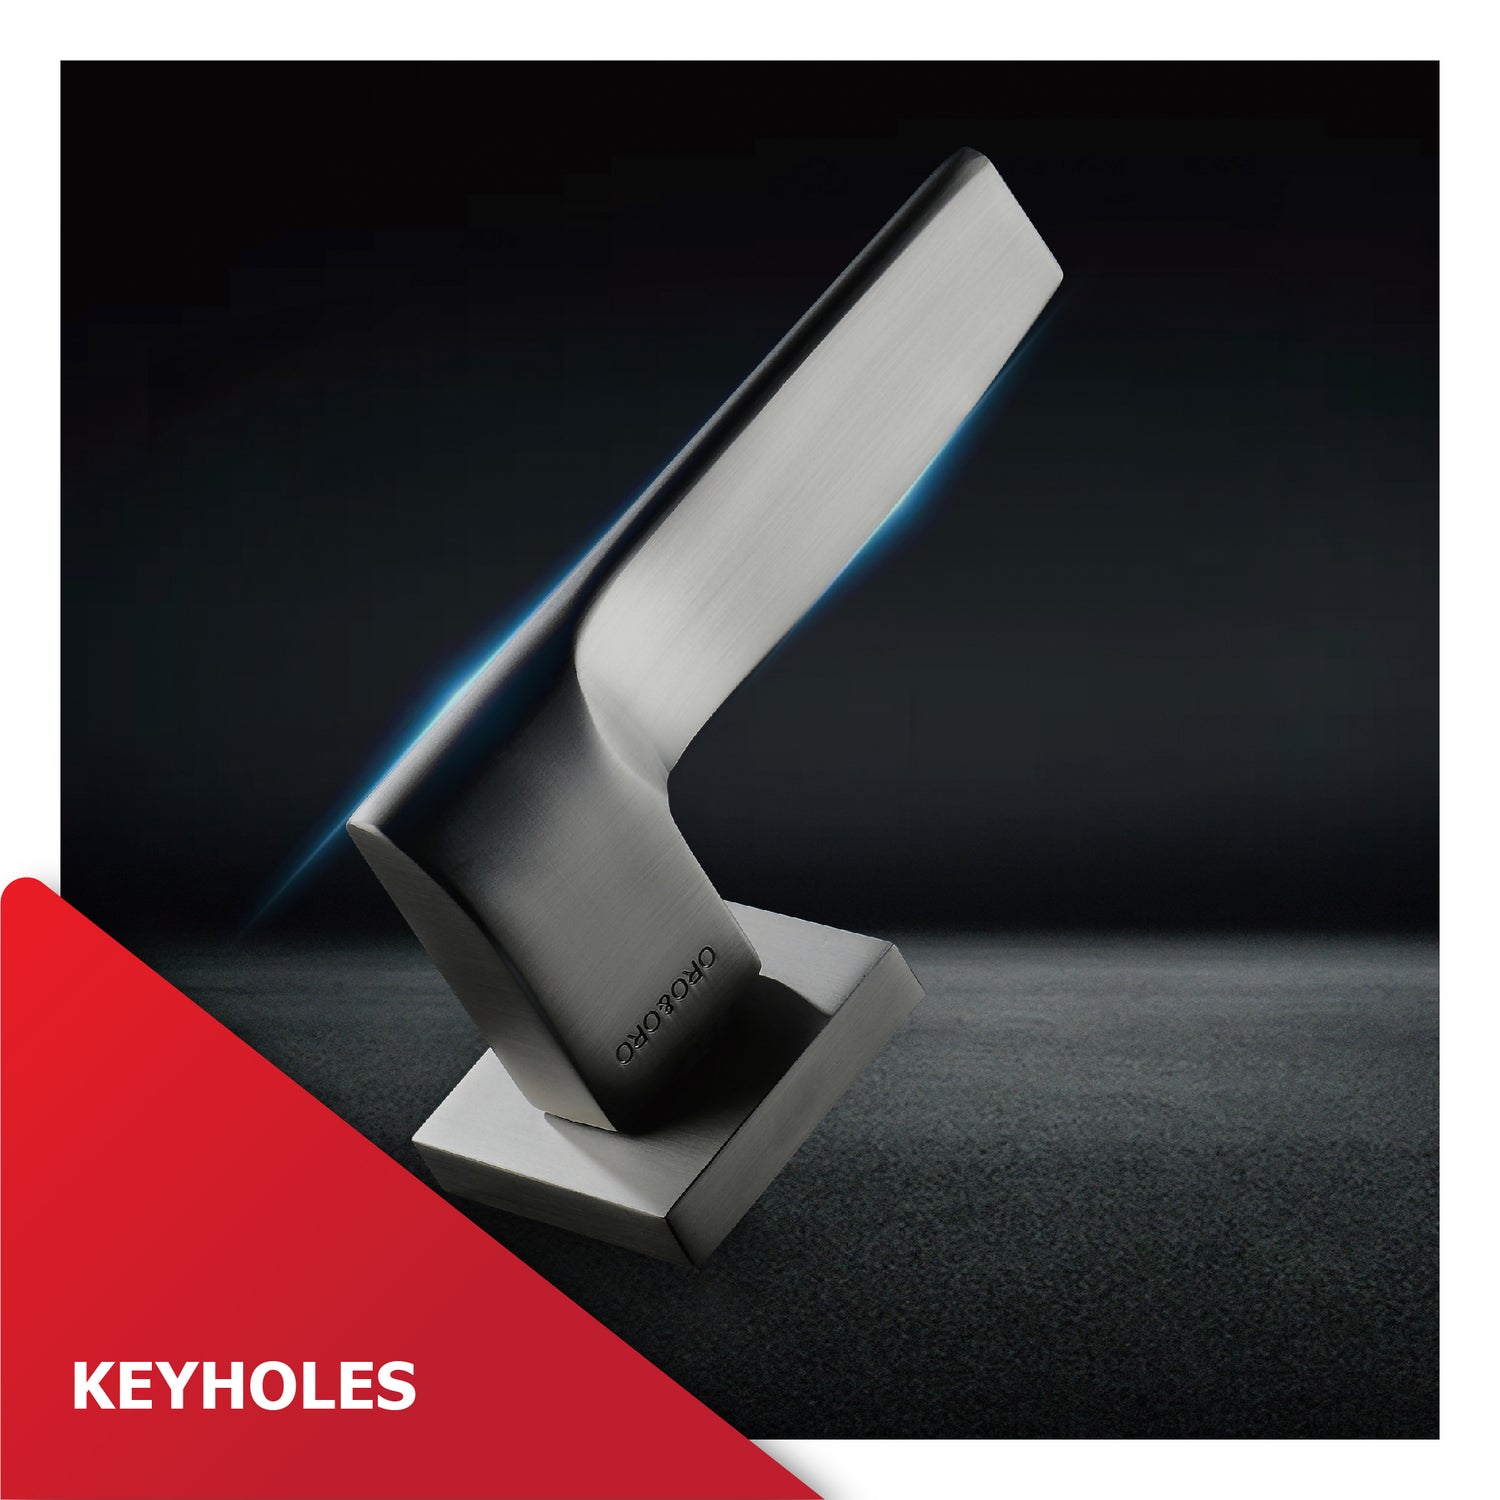 Keyholes - Explore our collection of stylish and durable keyholes for doors - M. M. Noorbhoy & Co.